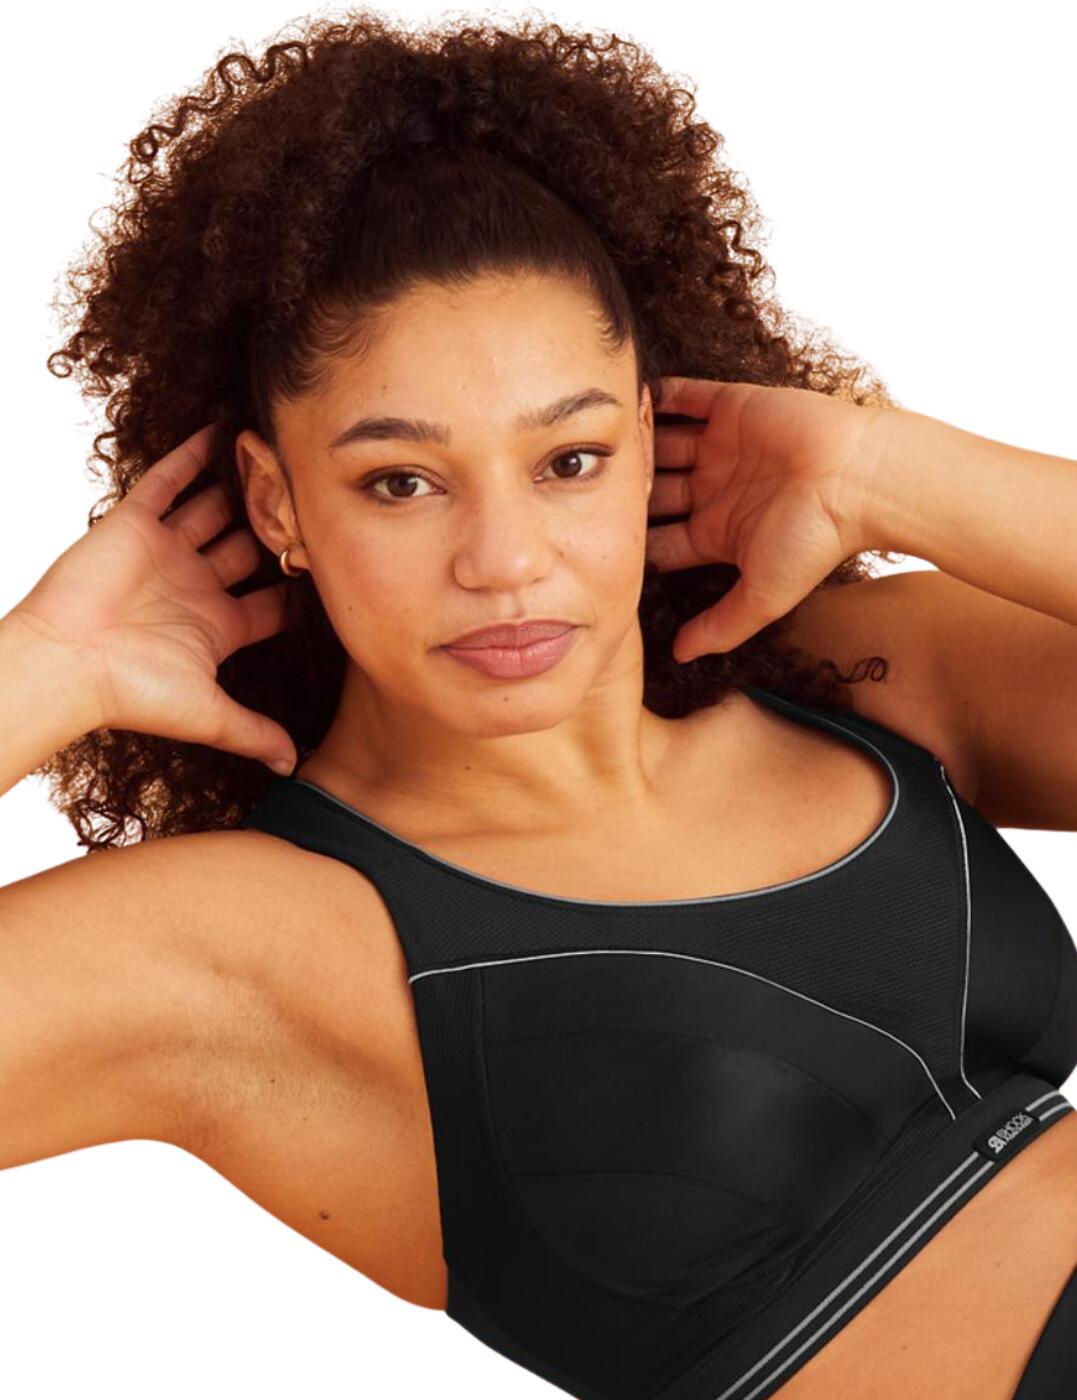 Shock Absorber High Impact Sports Bra S4490 Non Wired Gym Workout